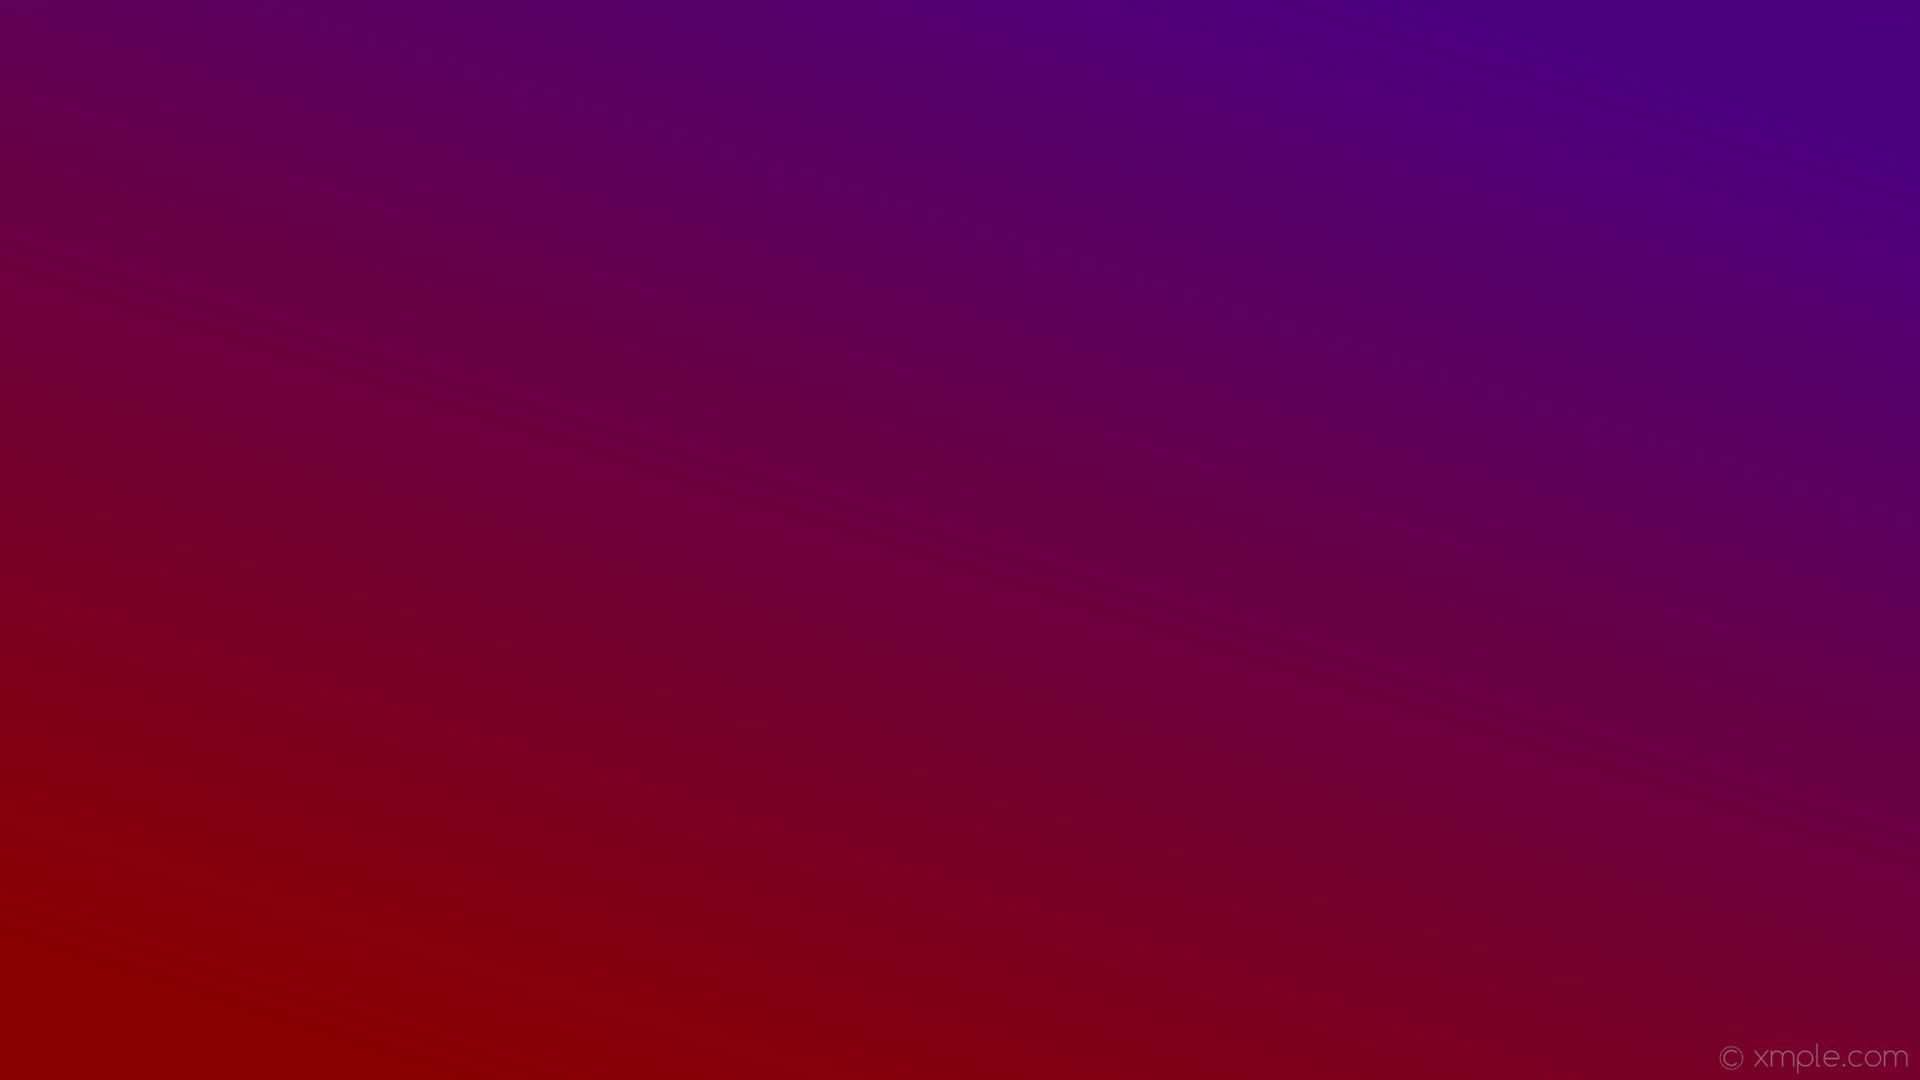 Red and Purple Wallpaper Free Red and Purple Background